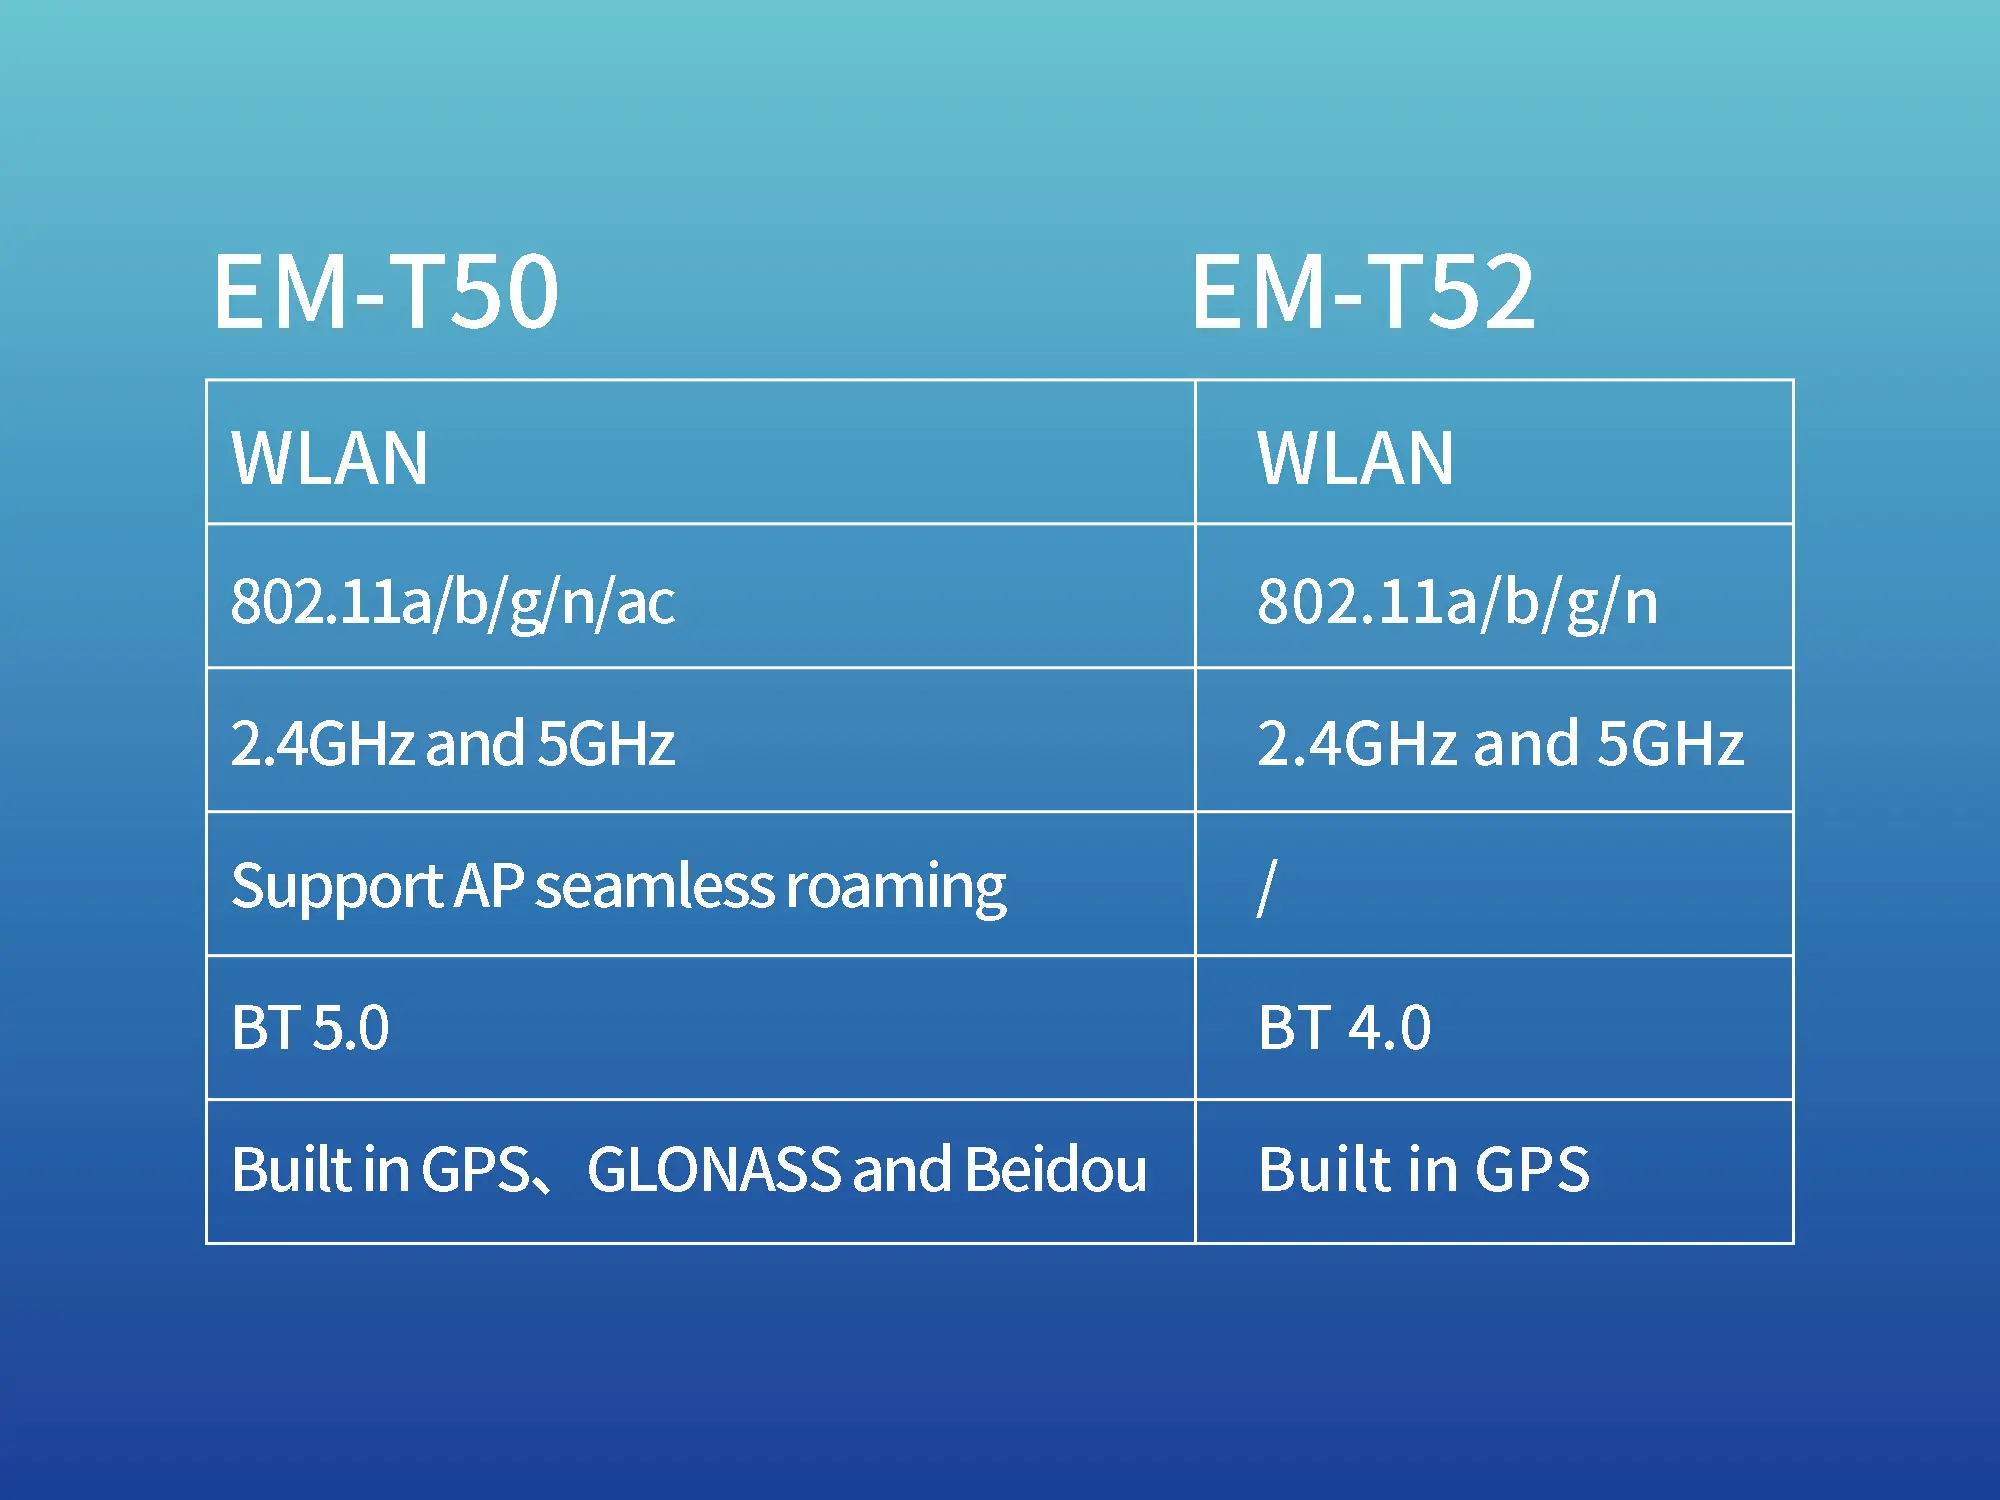 Difference between EM-T50 and EM-T52